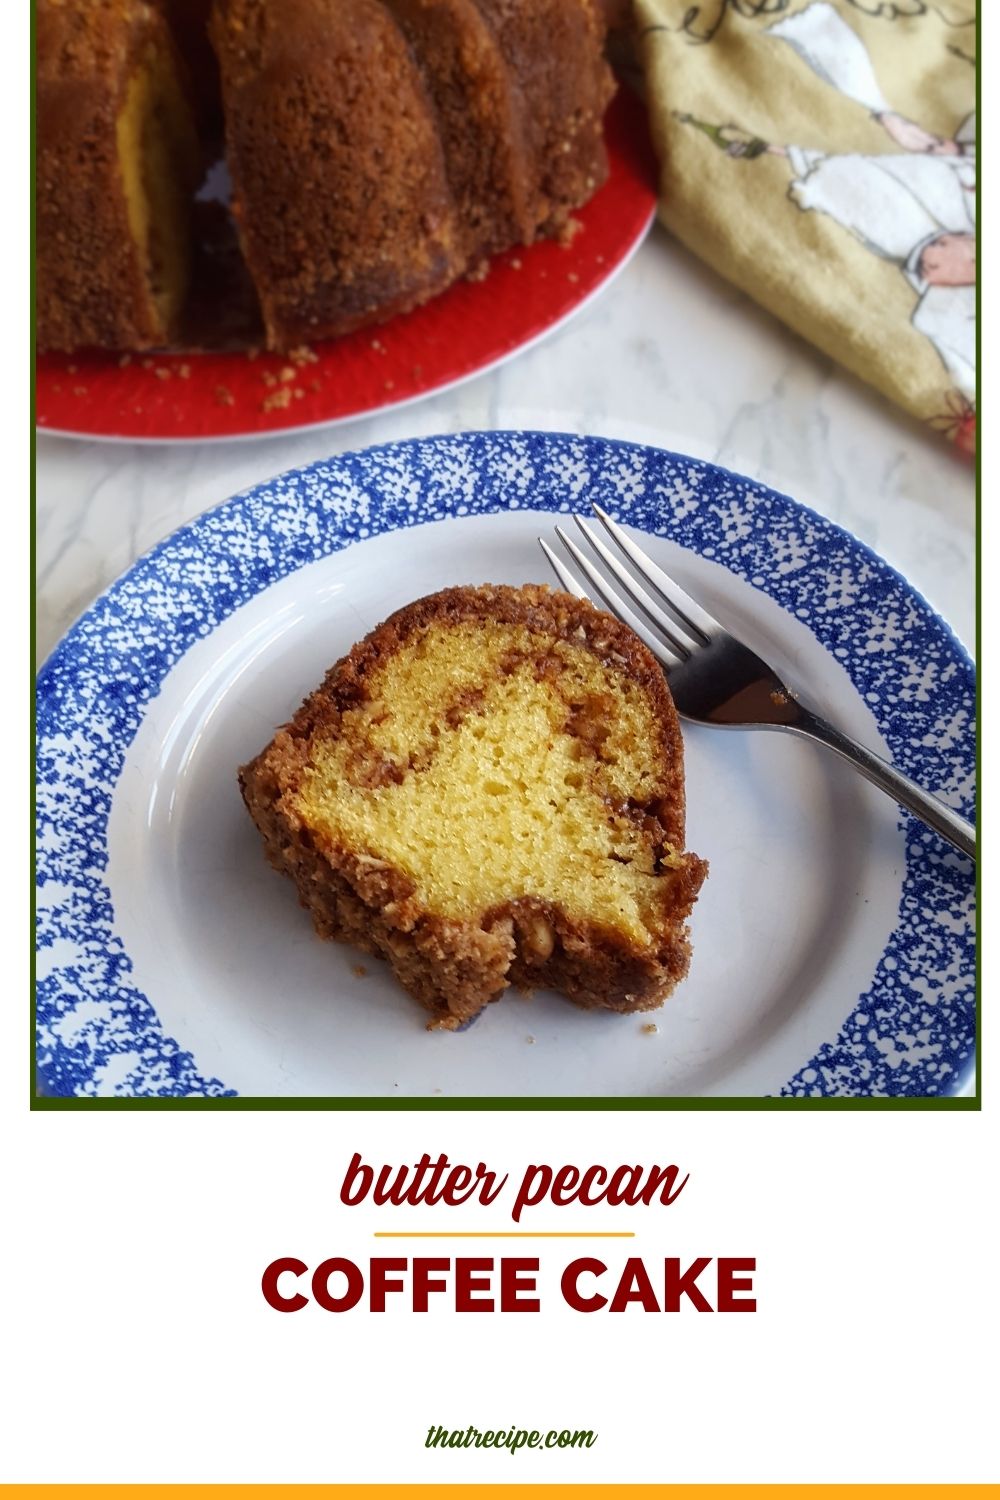 coffee cake slice on a plate with full cake in background with text overlay "butter pecan coffee cake"